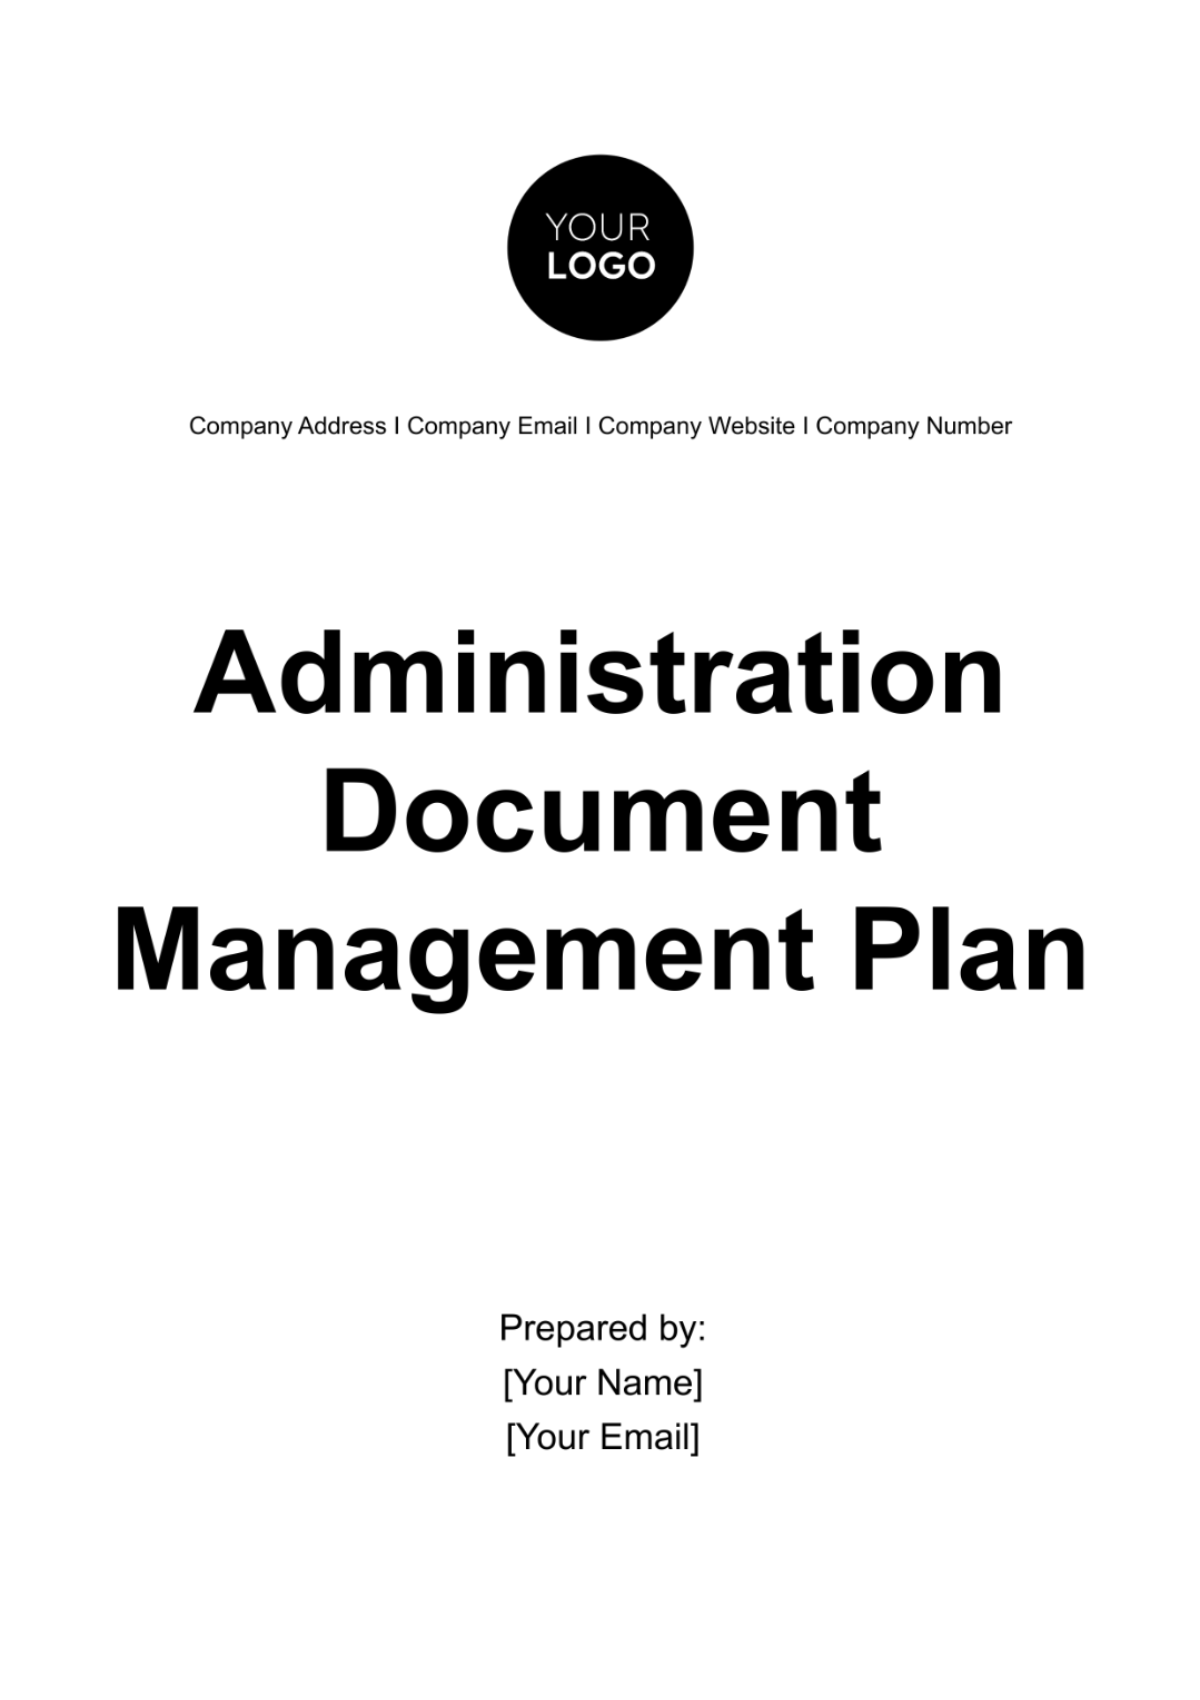 Free Administration Document Management Plan Template